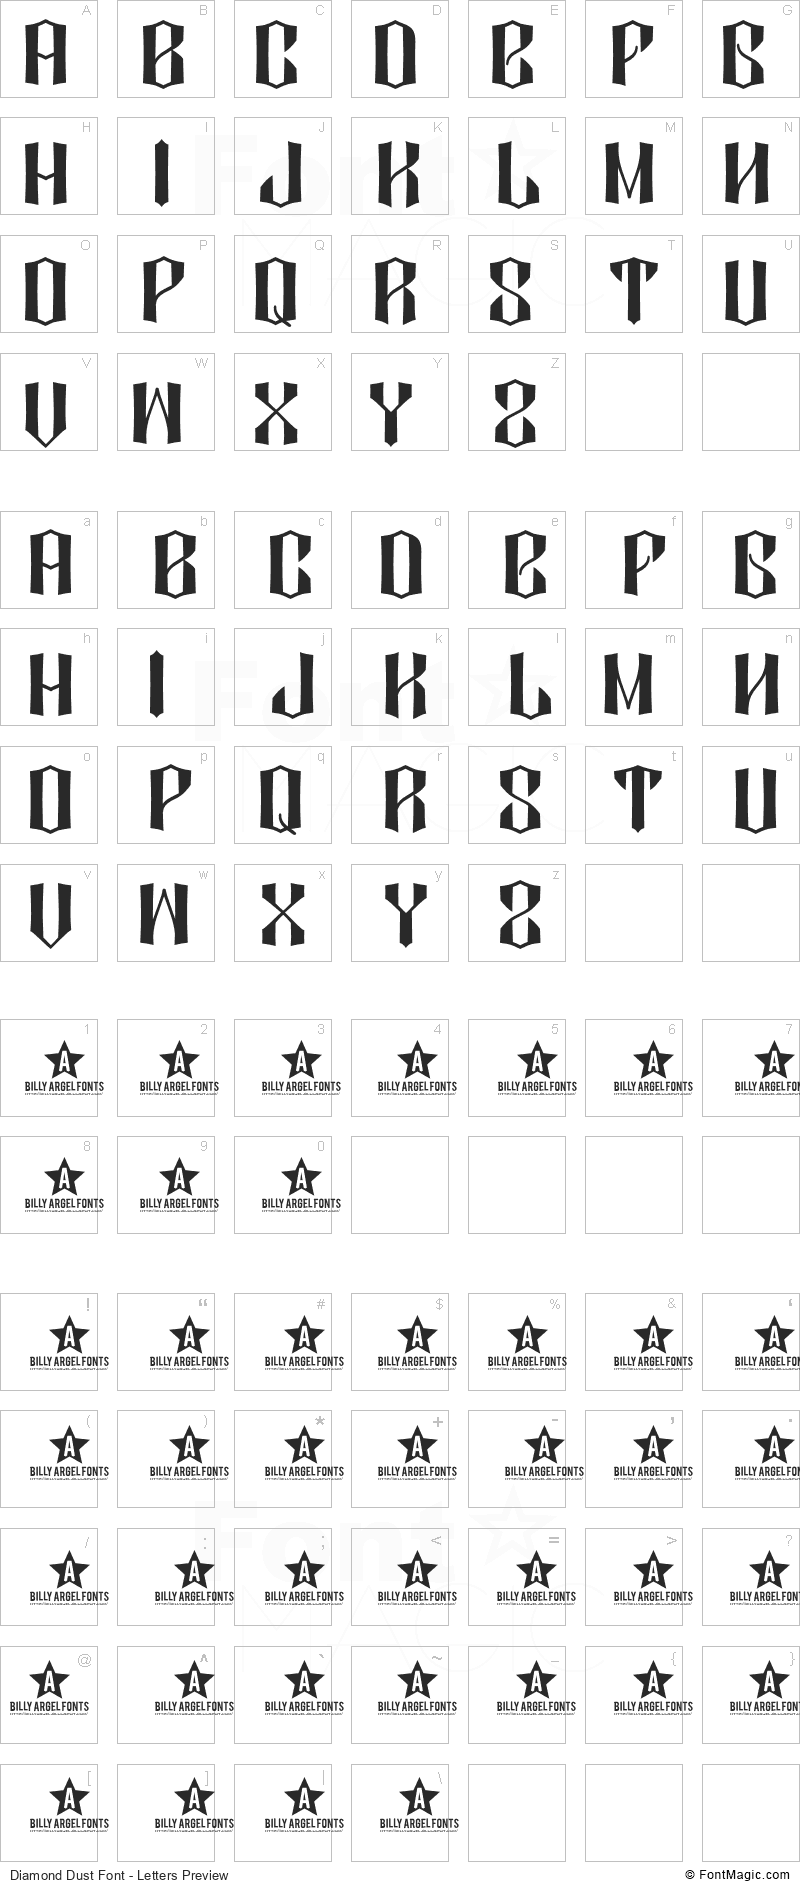 Diamond Dust Font - All Latters Preview Chart